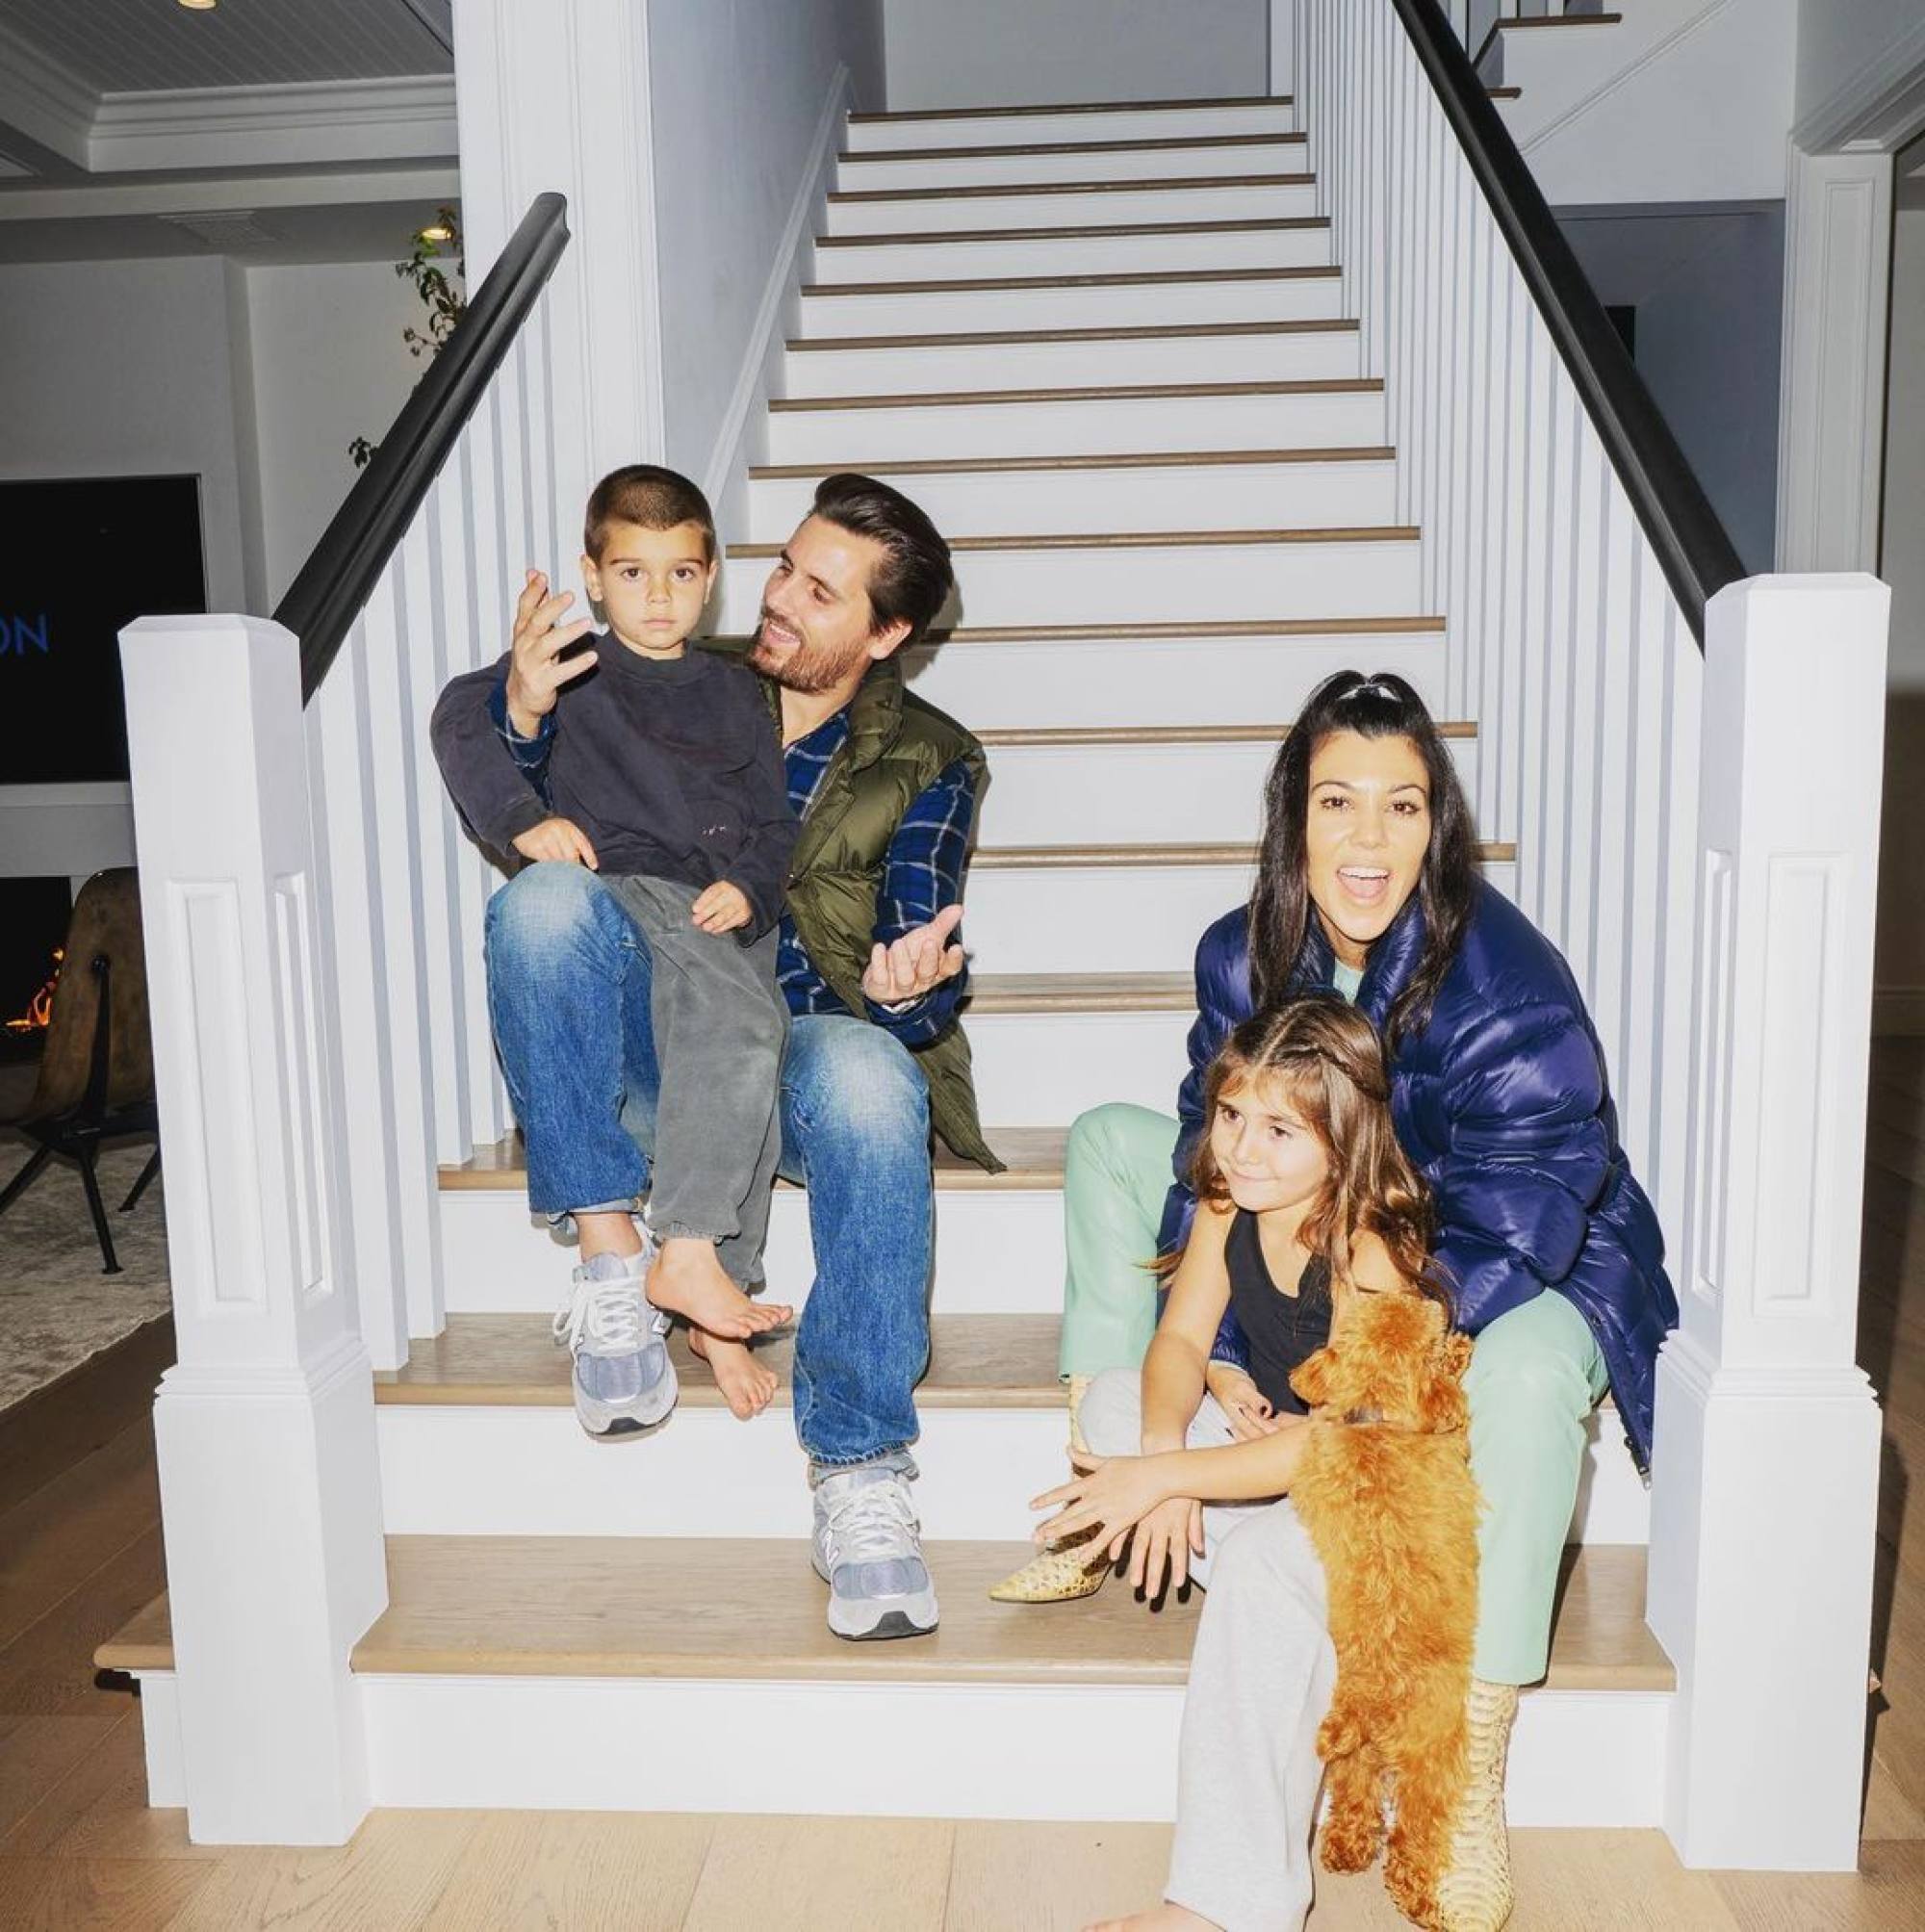 The luxury lives of Kourtney Kardashian's kids: Mason, Penelope and Reign brands like Gucci and Versace, enjoy holidays in Mexico and hang out with like Justin Bieber | South